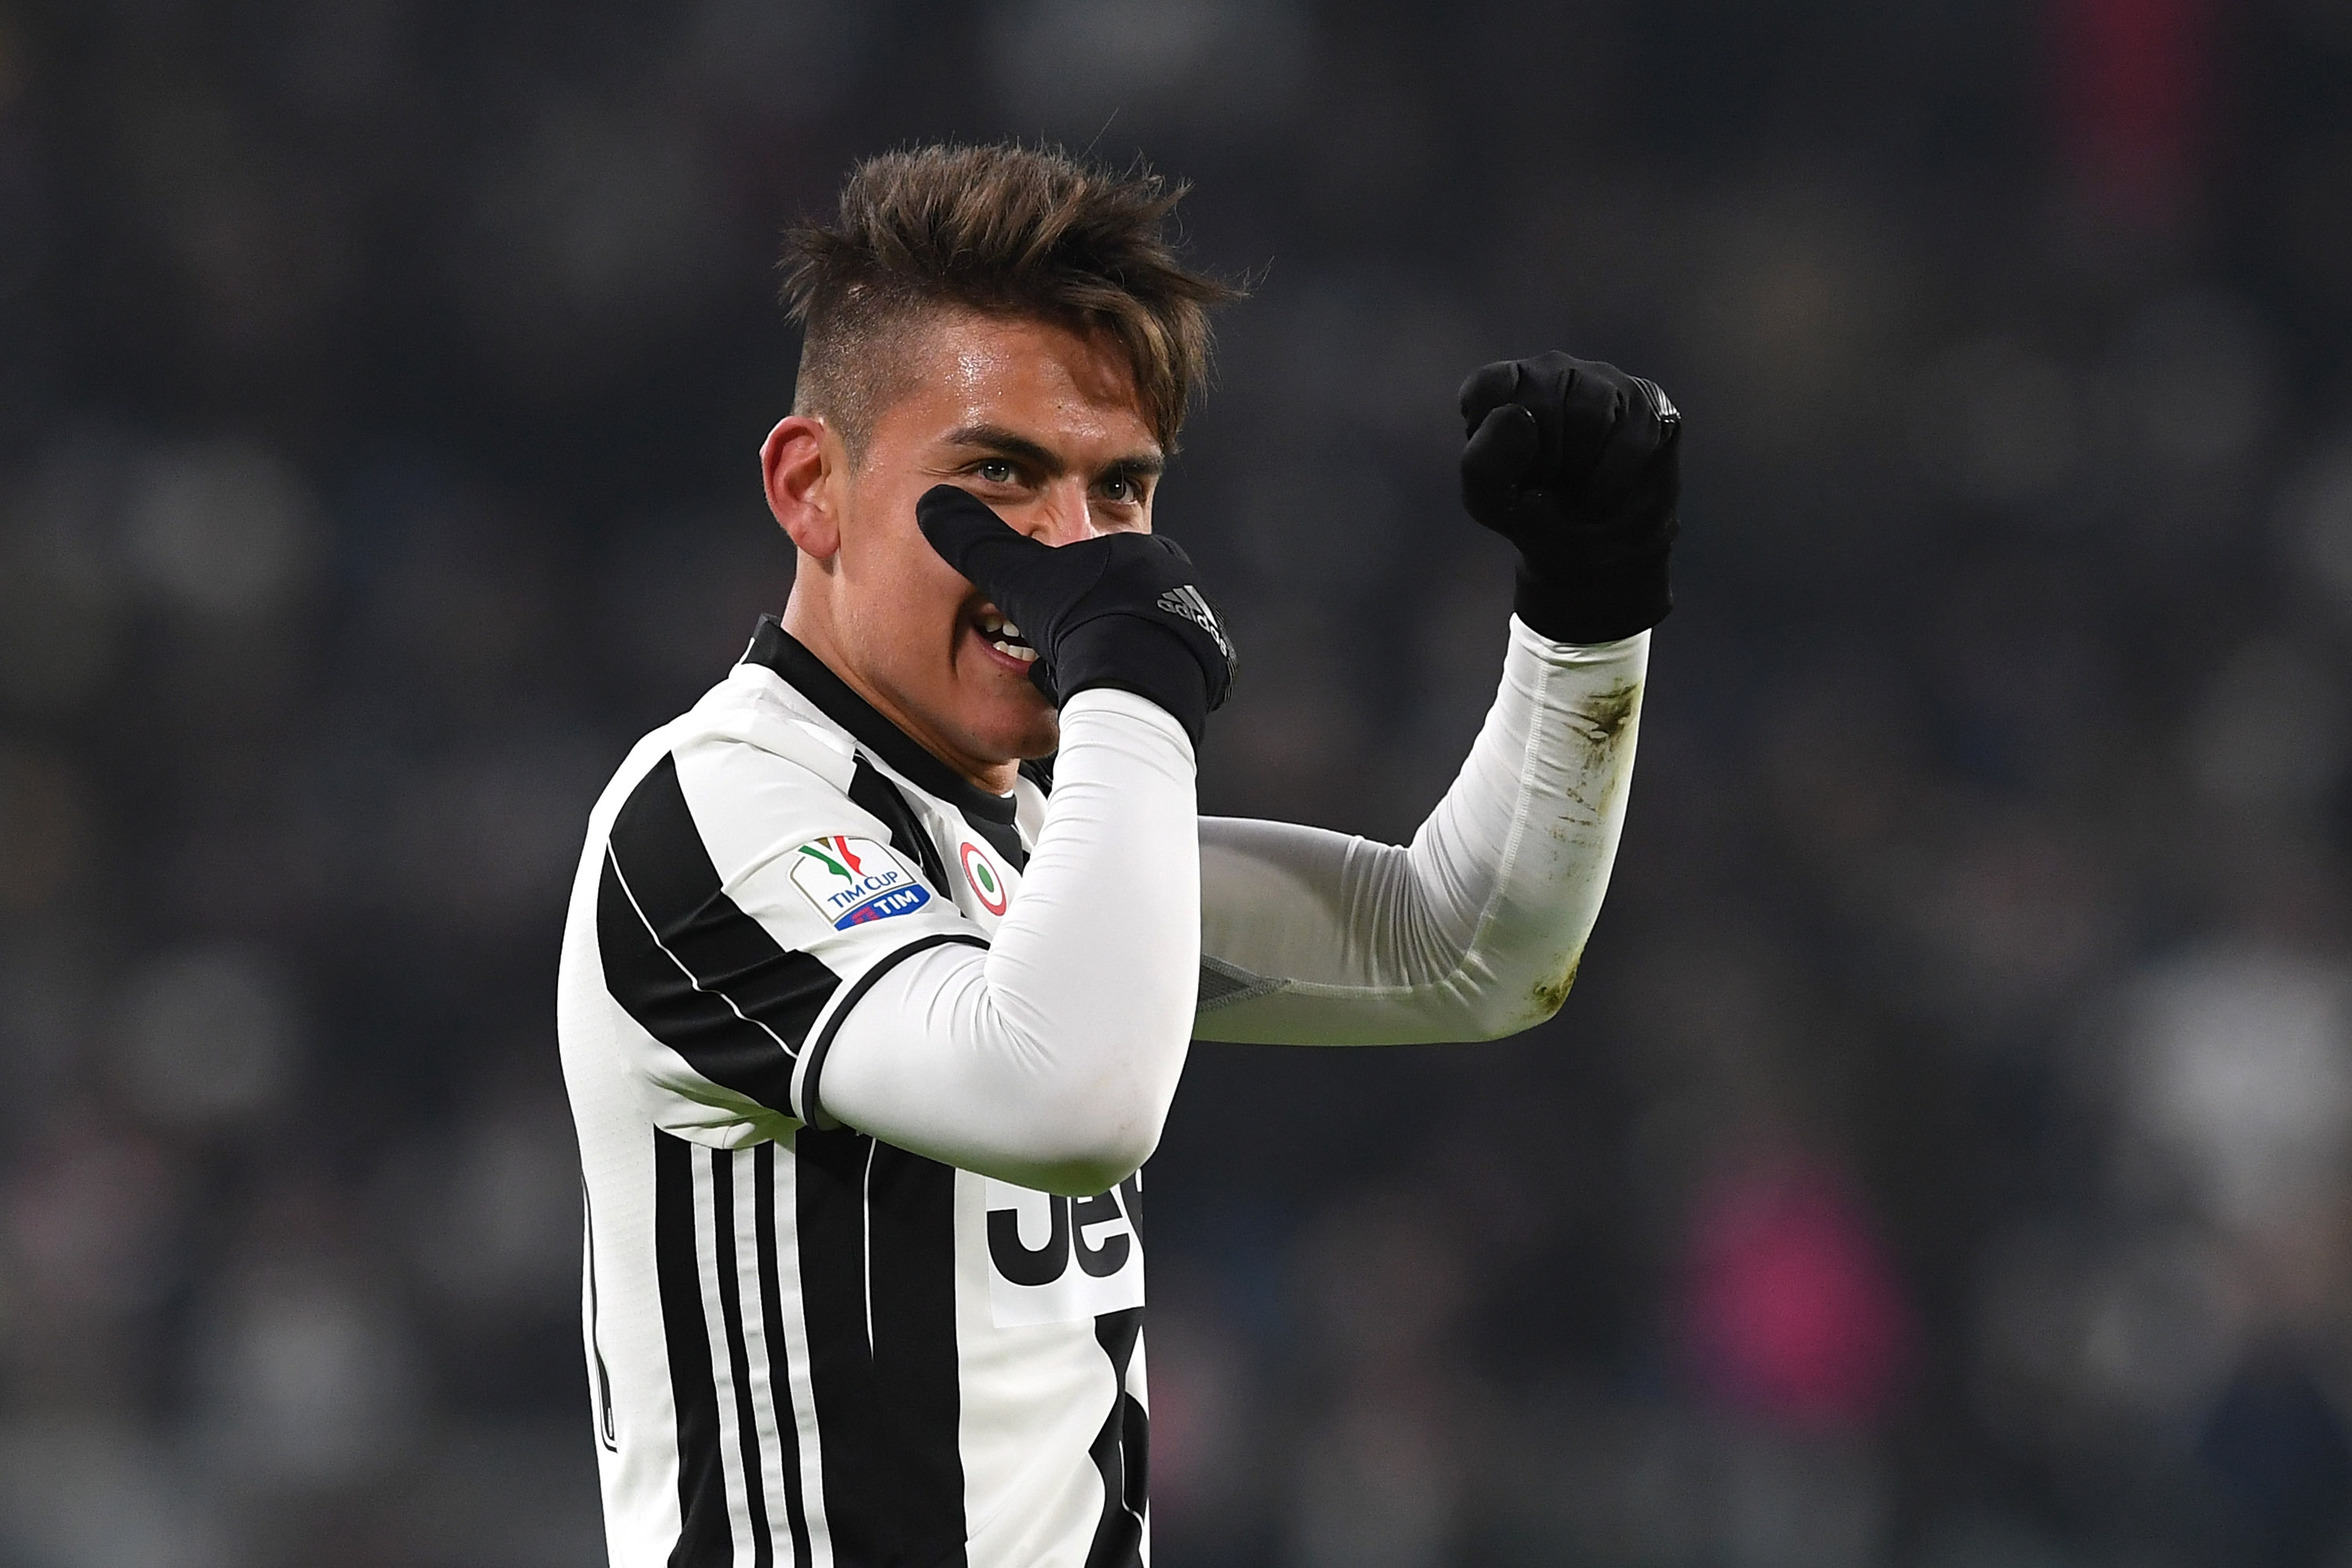 Dybala: "Barca or Real? I'm only thinking about Juventus" -Juvefc.com